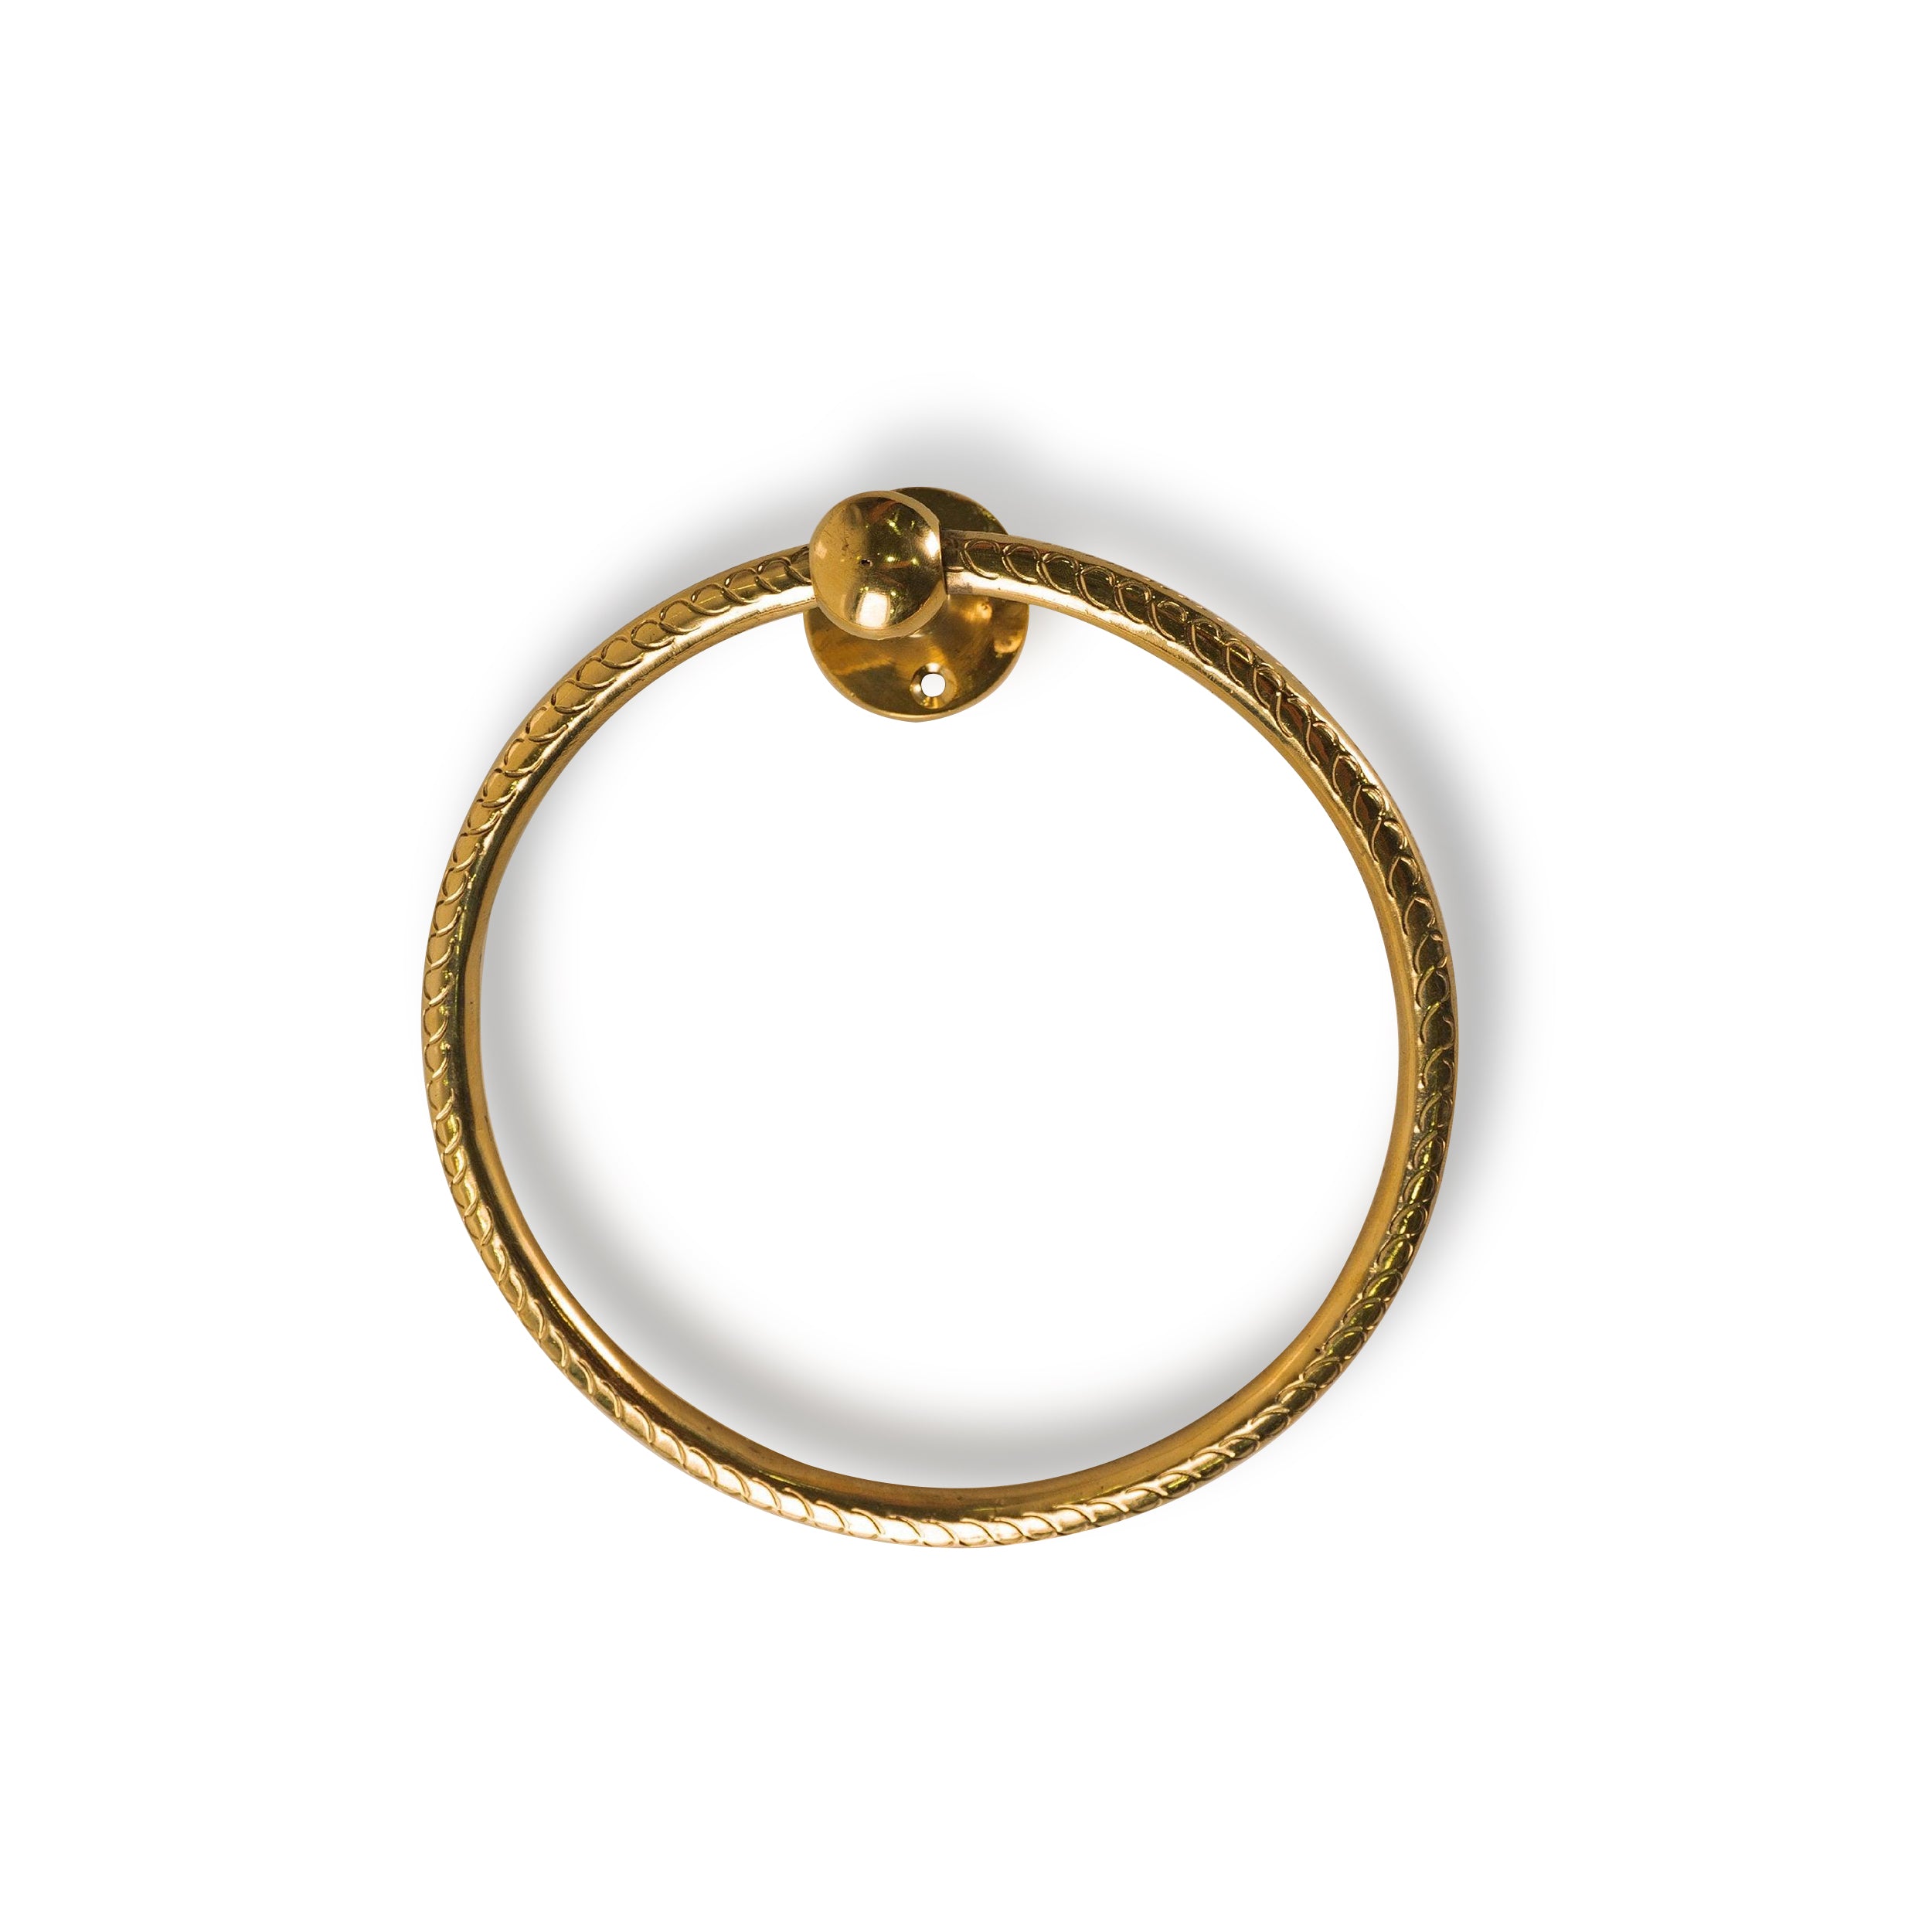 Solid Brass Towel Ring for Bathroom - Zayian